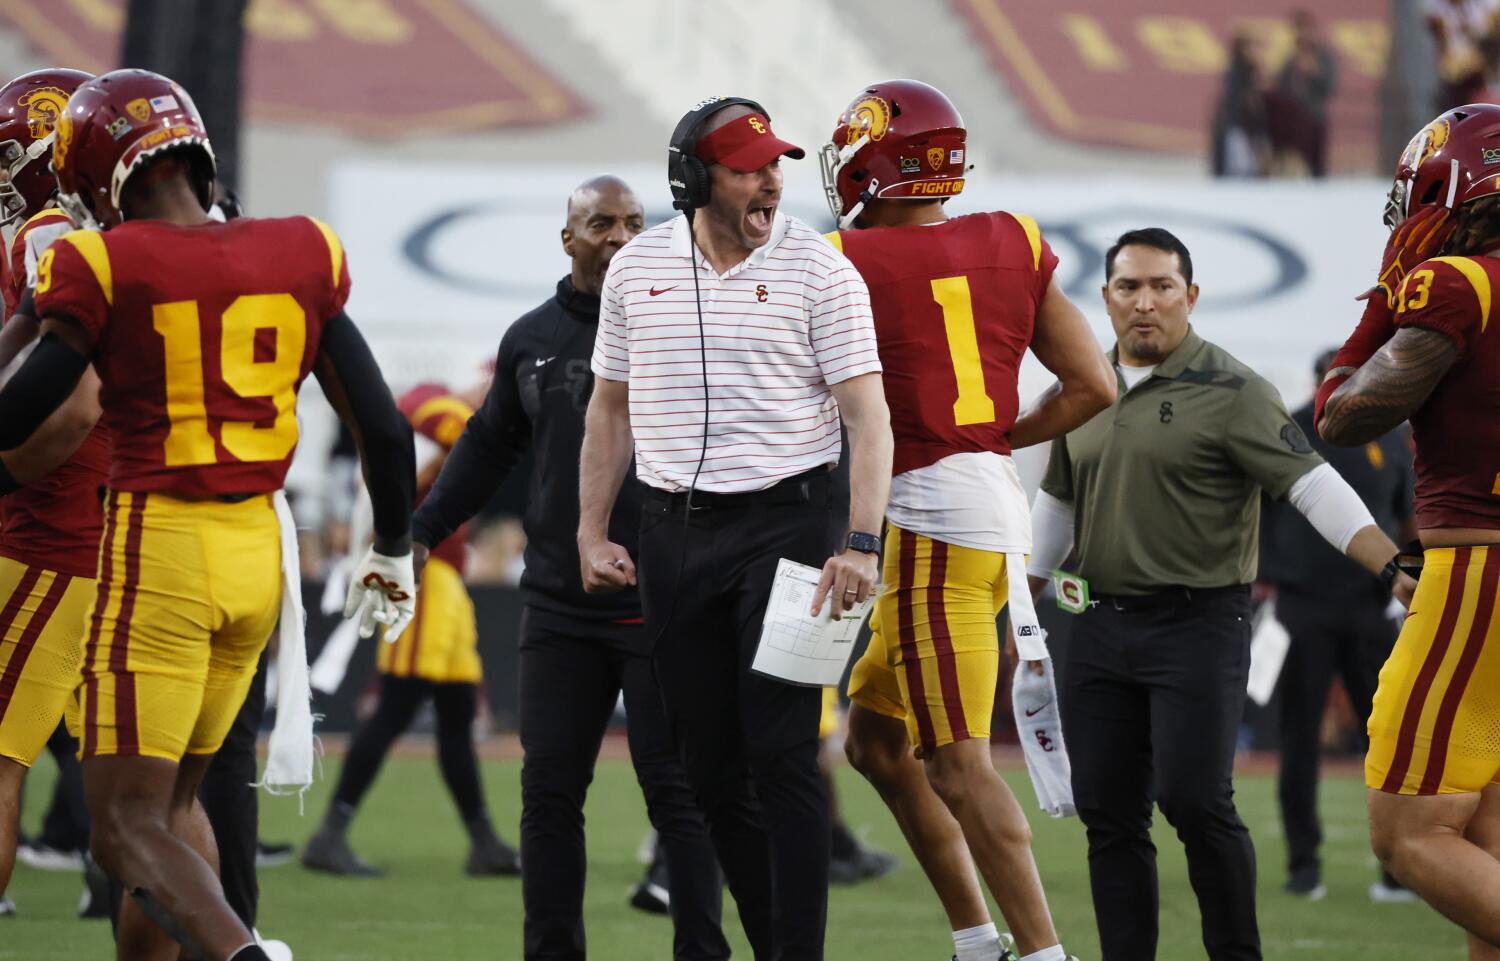 Plaschke: Grinched again! In keeping embattled defensive coordinator, USC lost its season